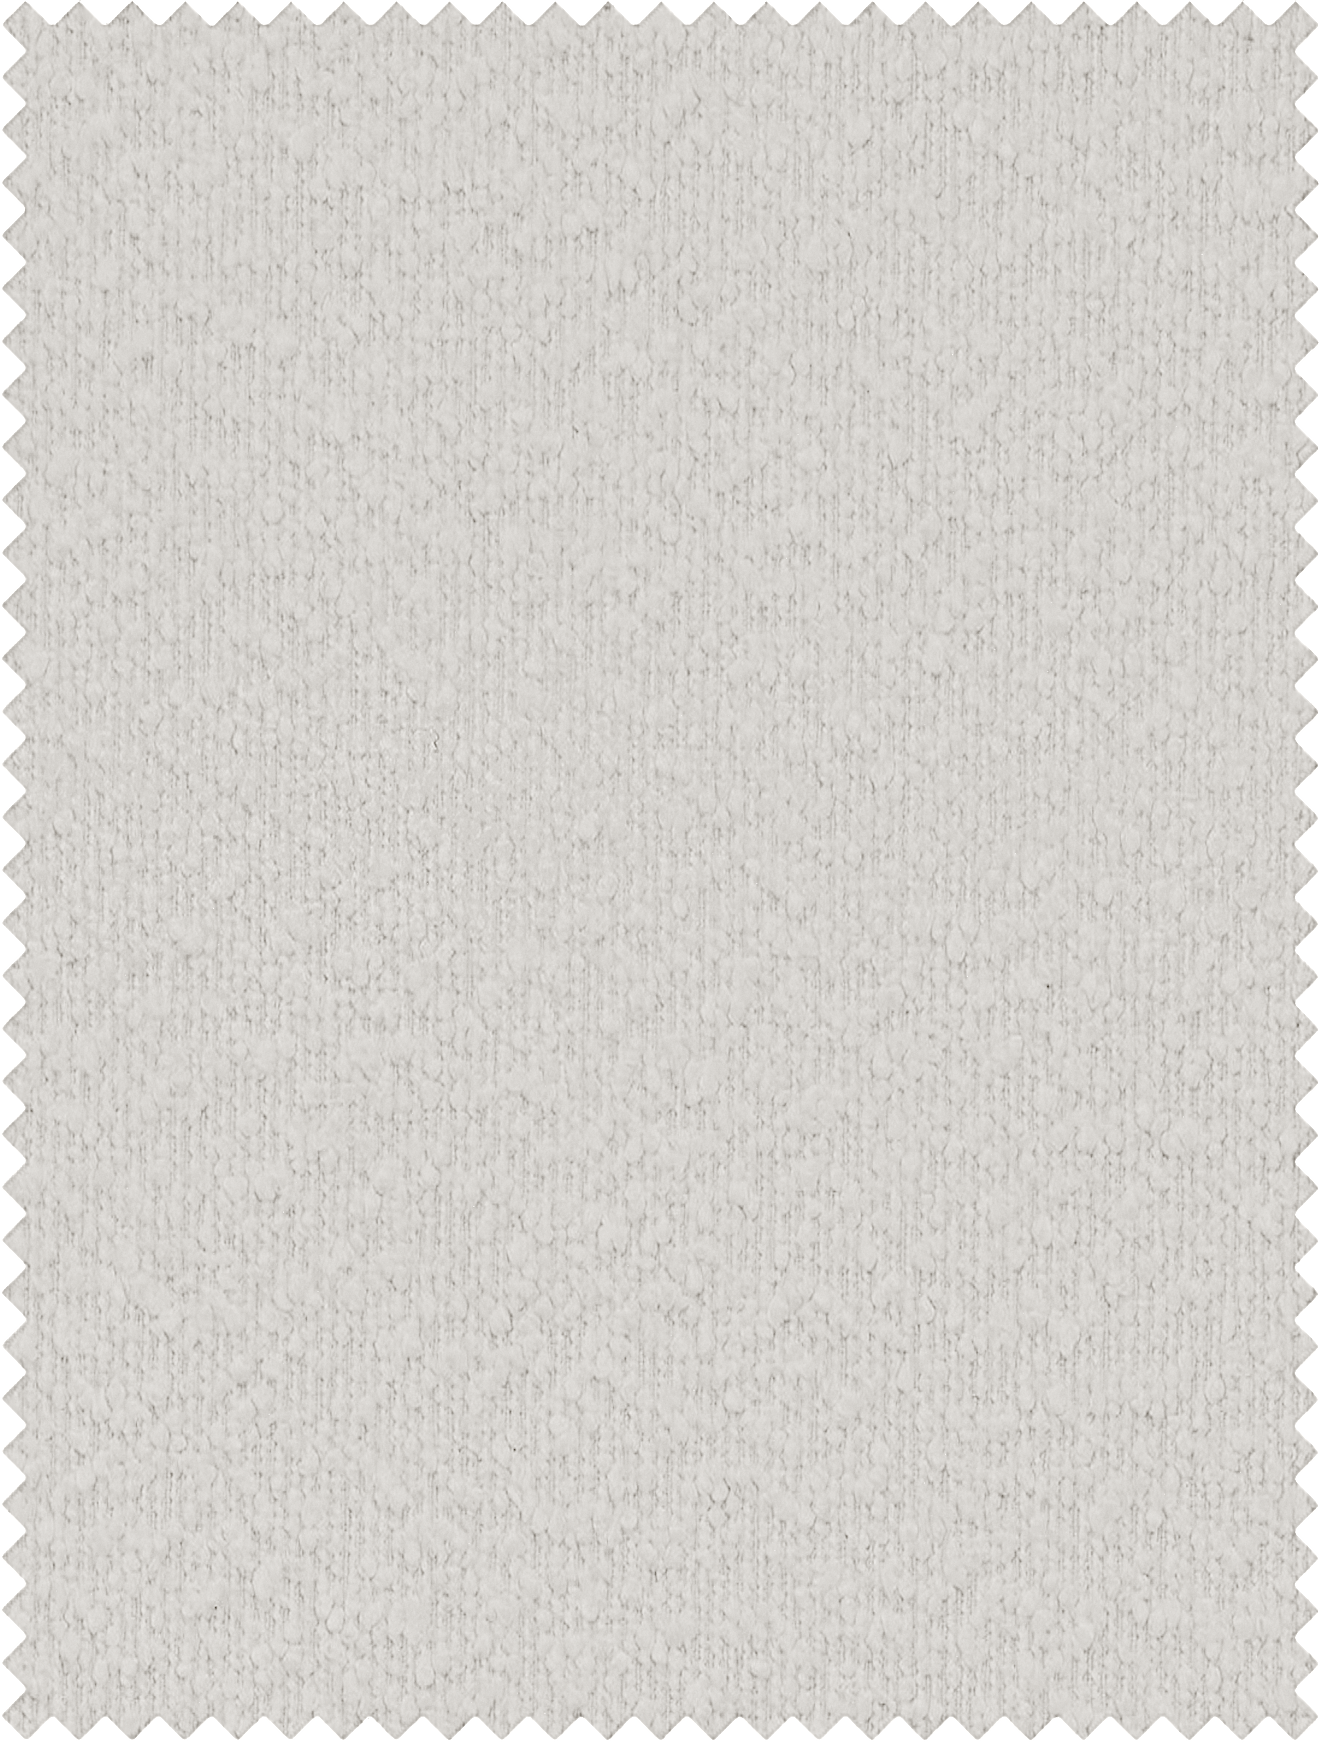 Boucle Ivory Swatch paper from vantpanel with a green zigzag border.